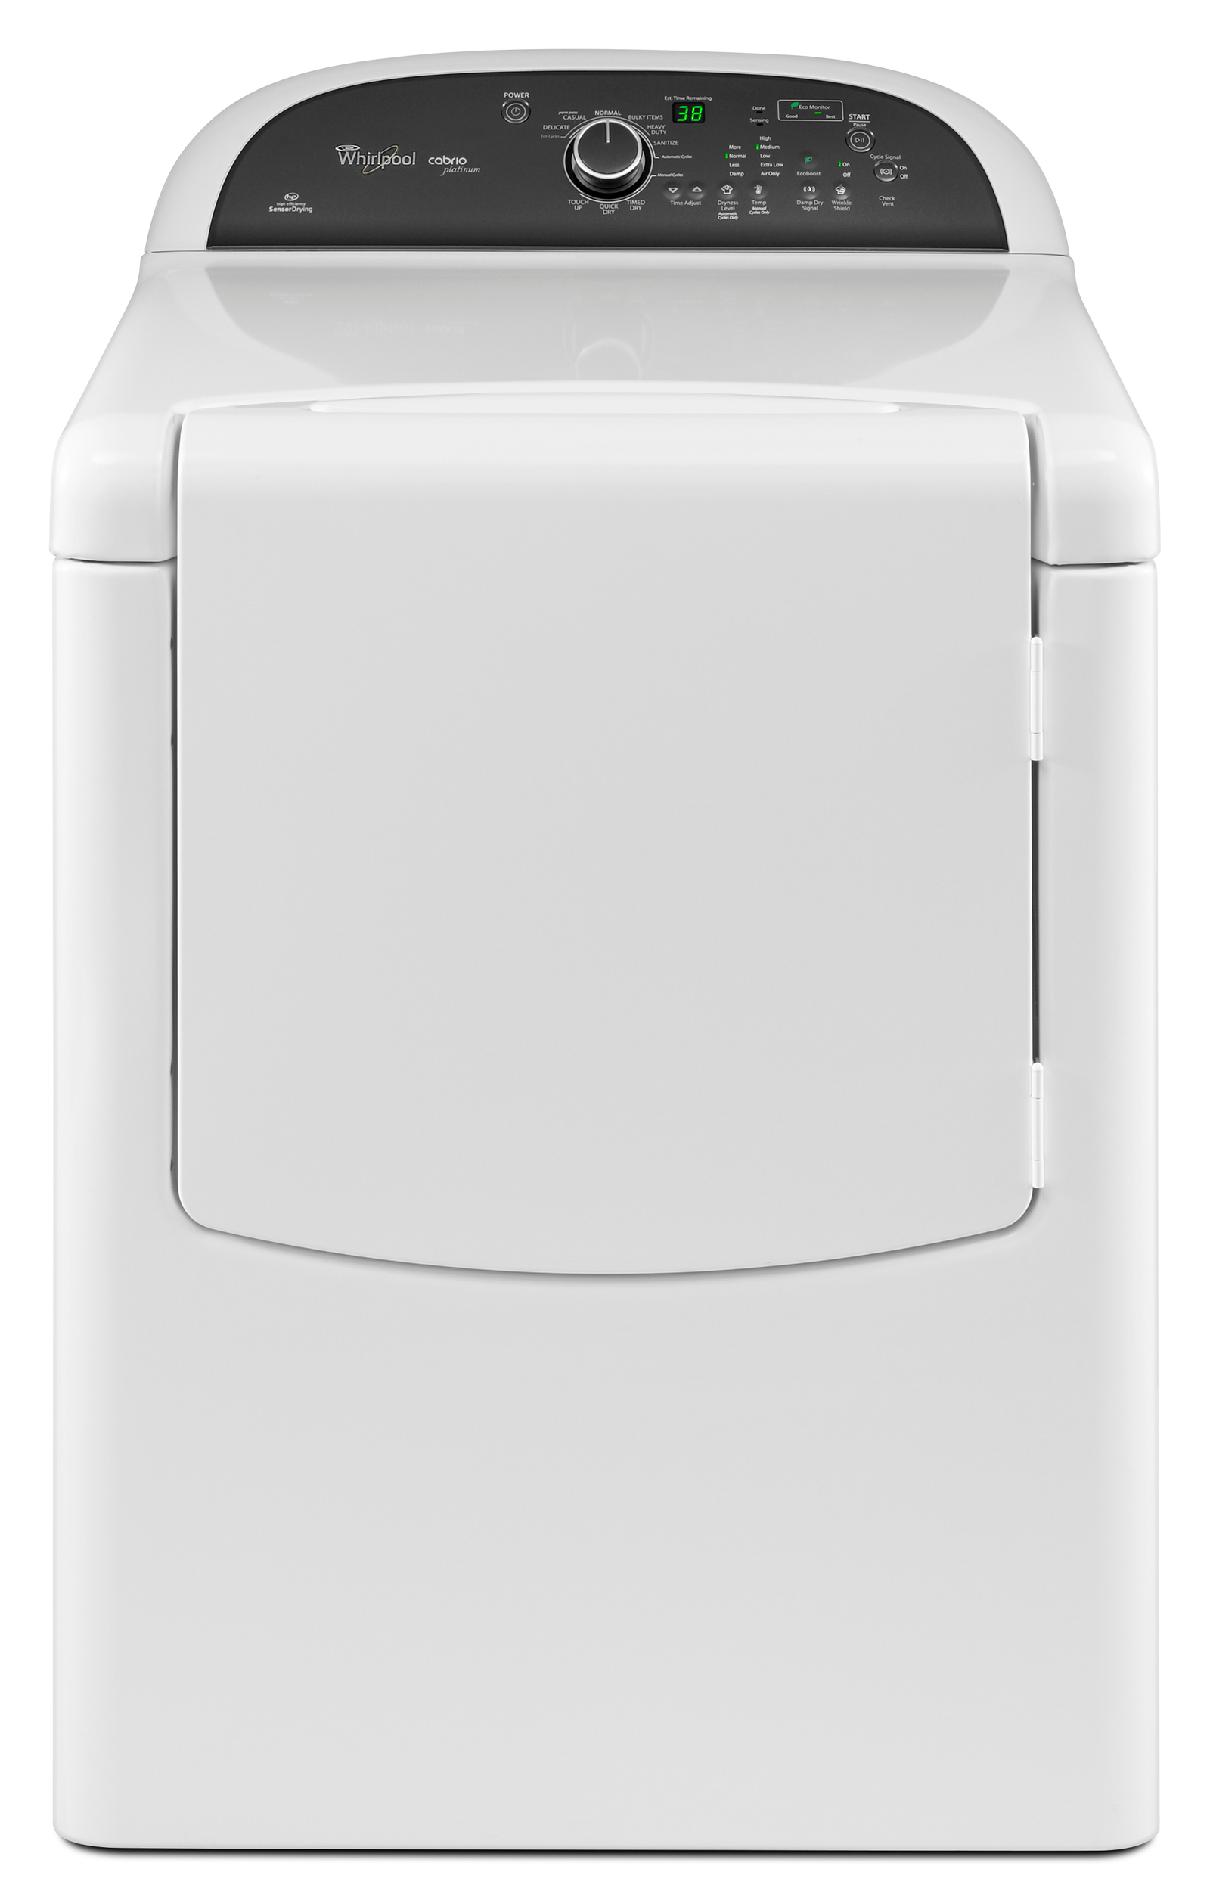 Whirlpool 7.6 cu. ft. Electric Dryer w/ Advanced Moisture Sensing - White 7.0 cu. ft. and greater